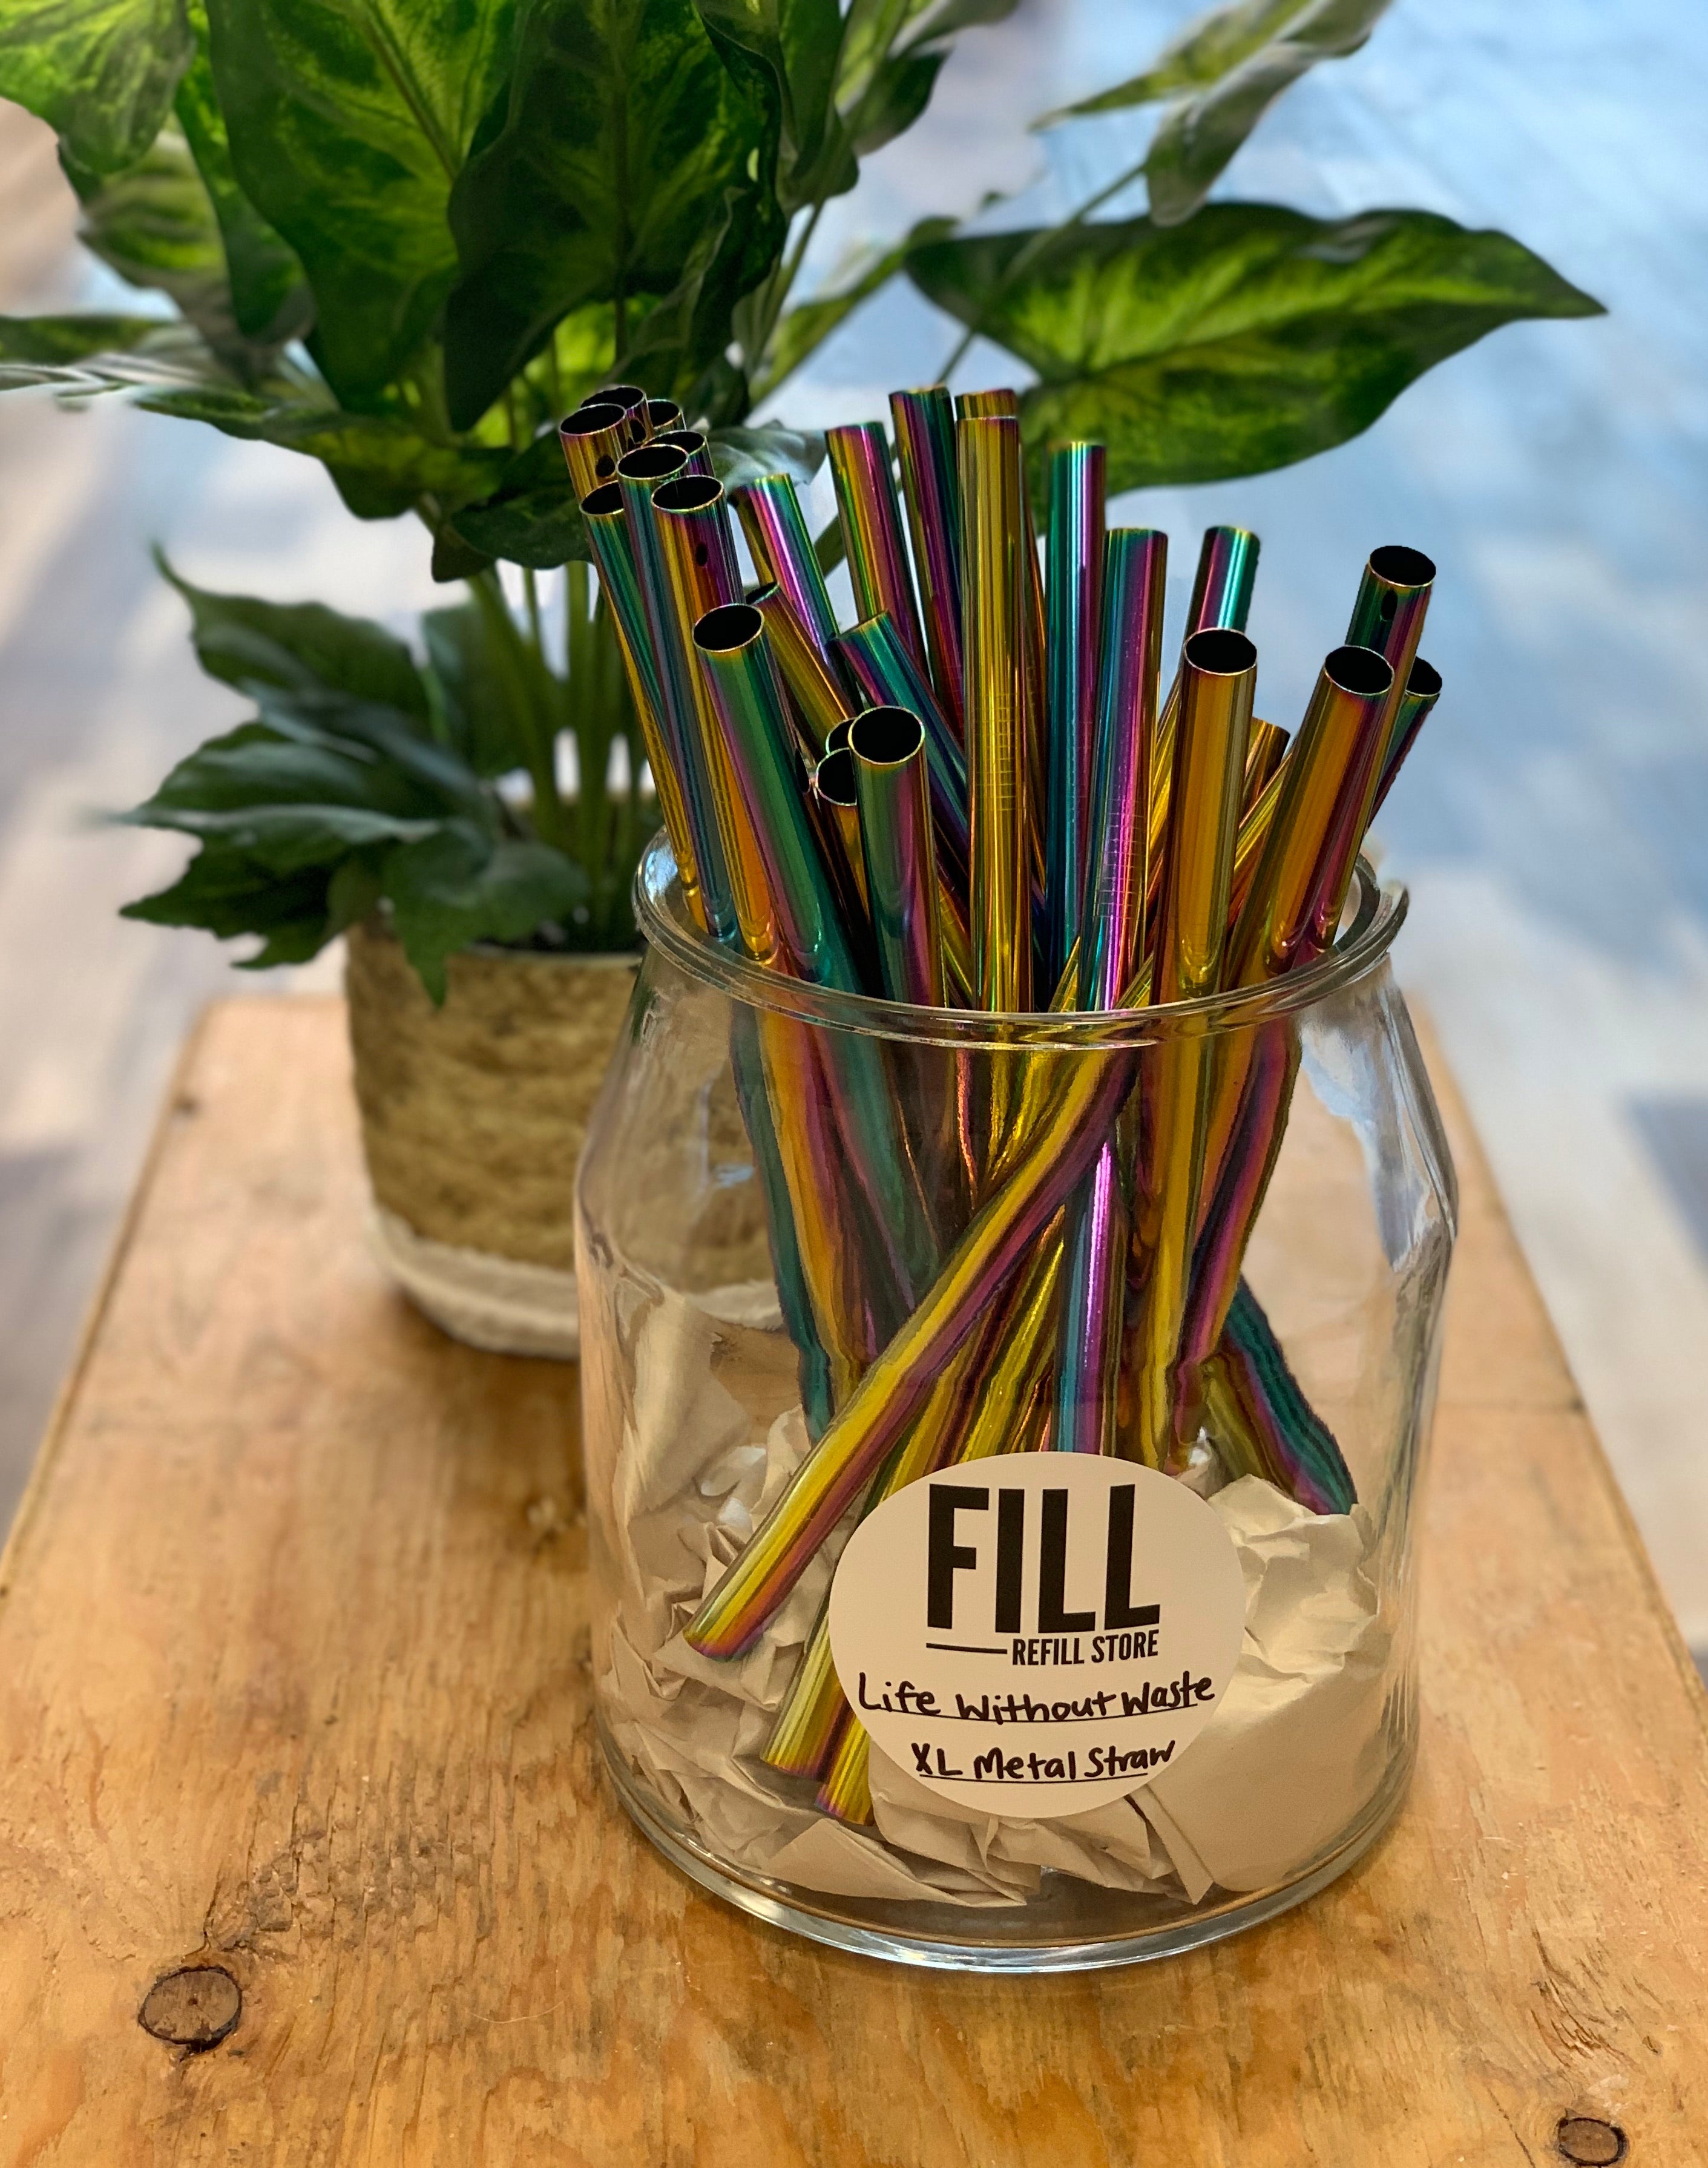 Life Without Waste- XL Wide Metal Straw